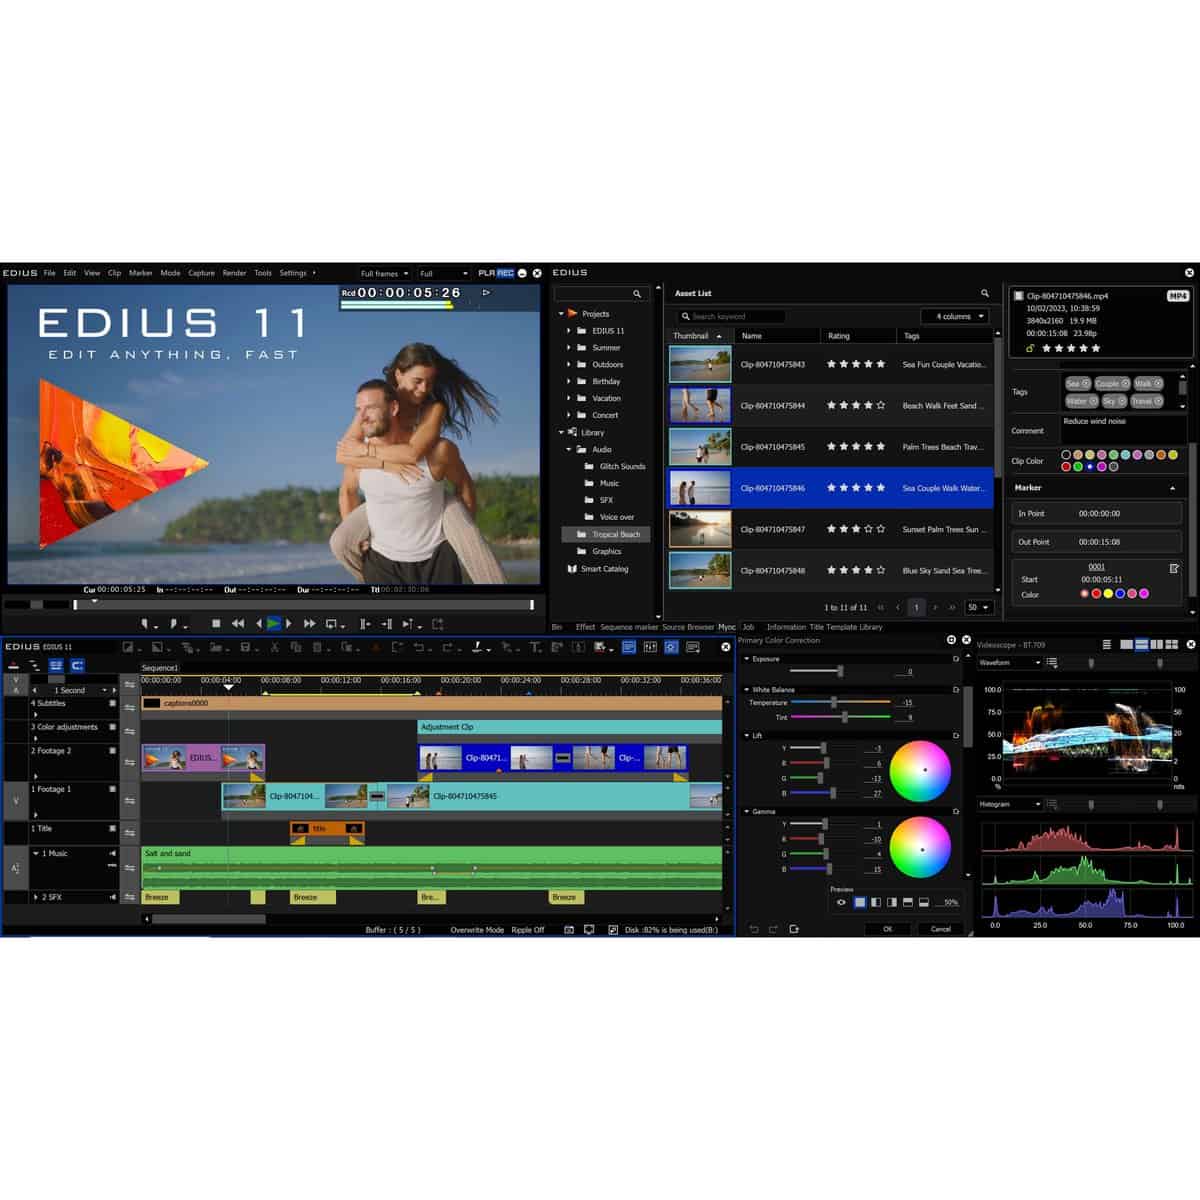 EDIUS 11 Pro Video Editing Software, Download Only